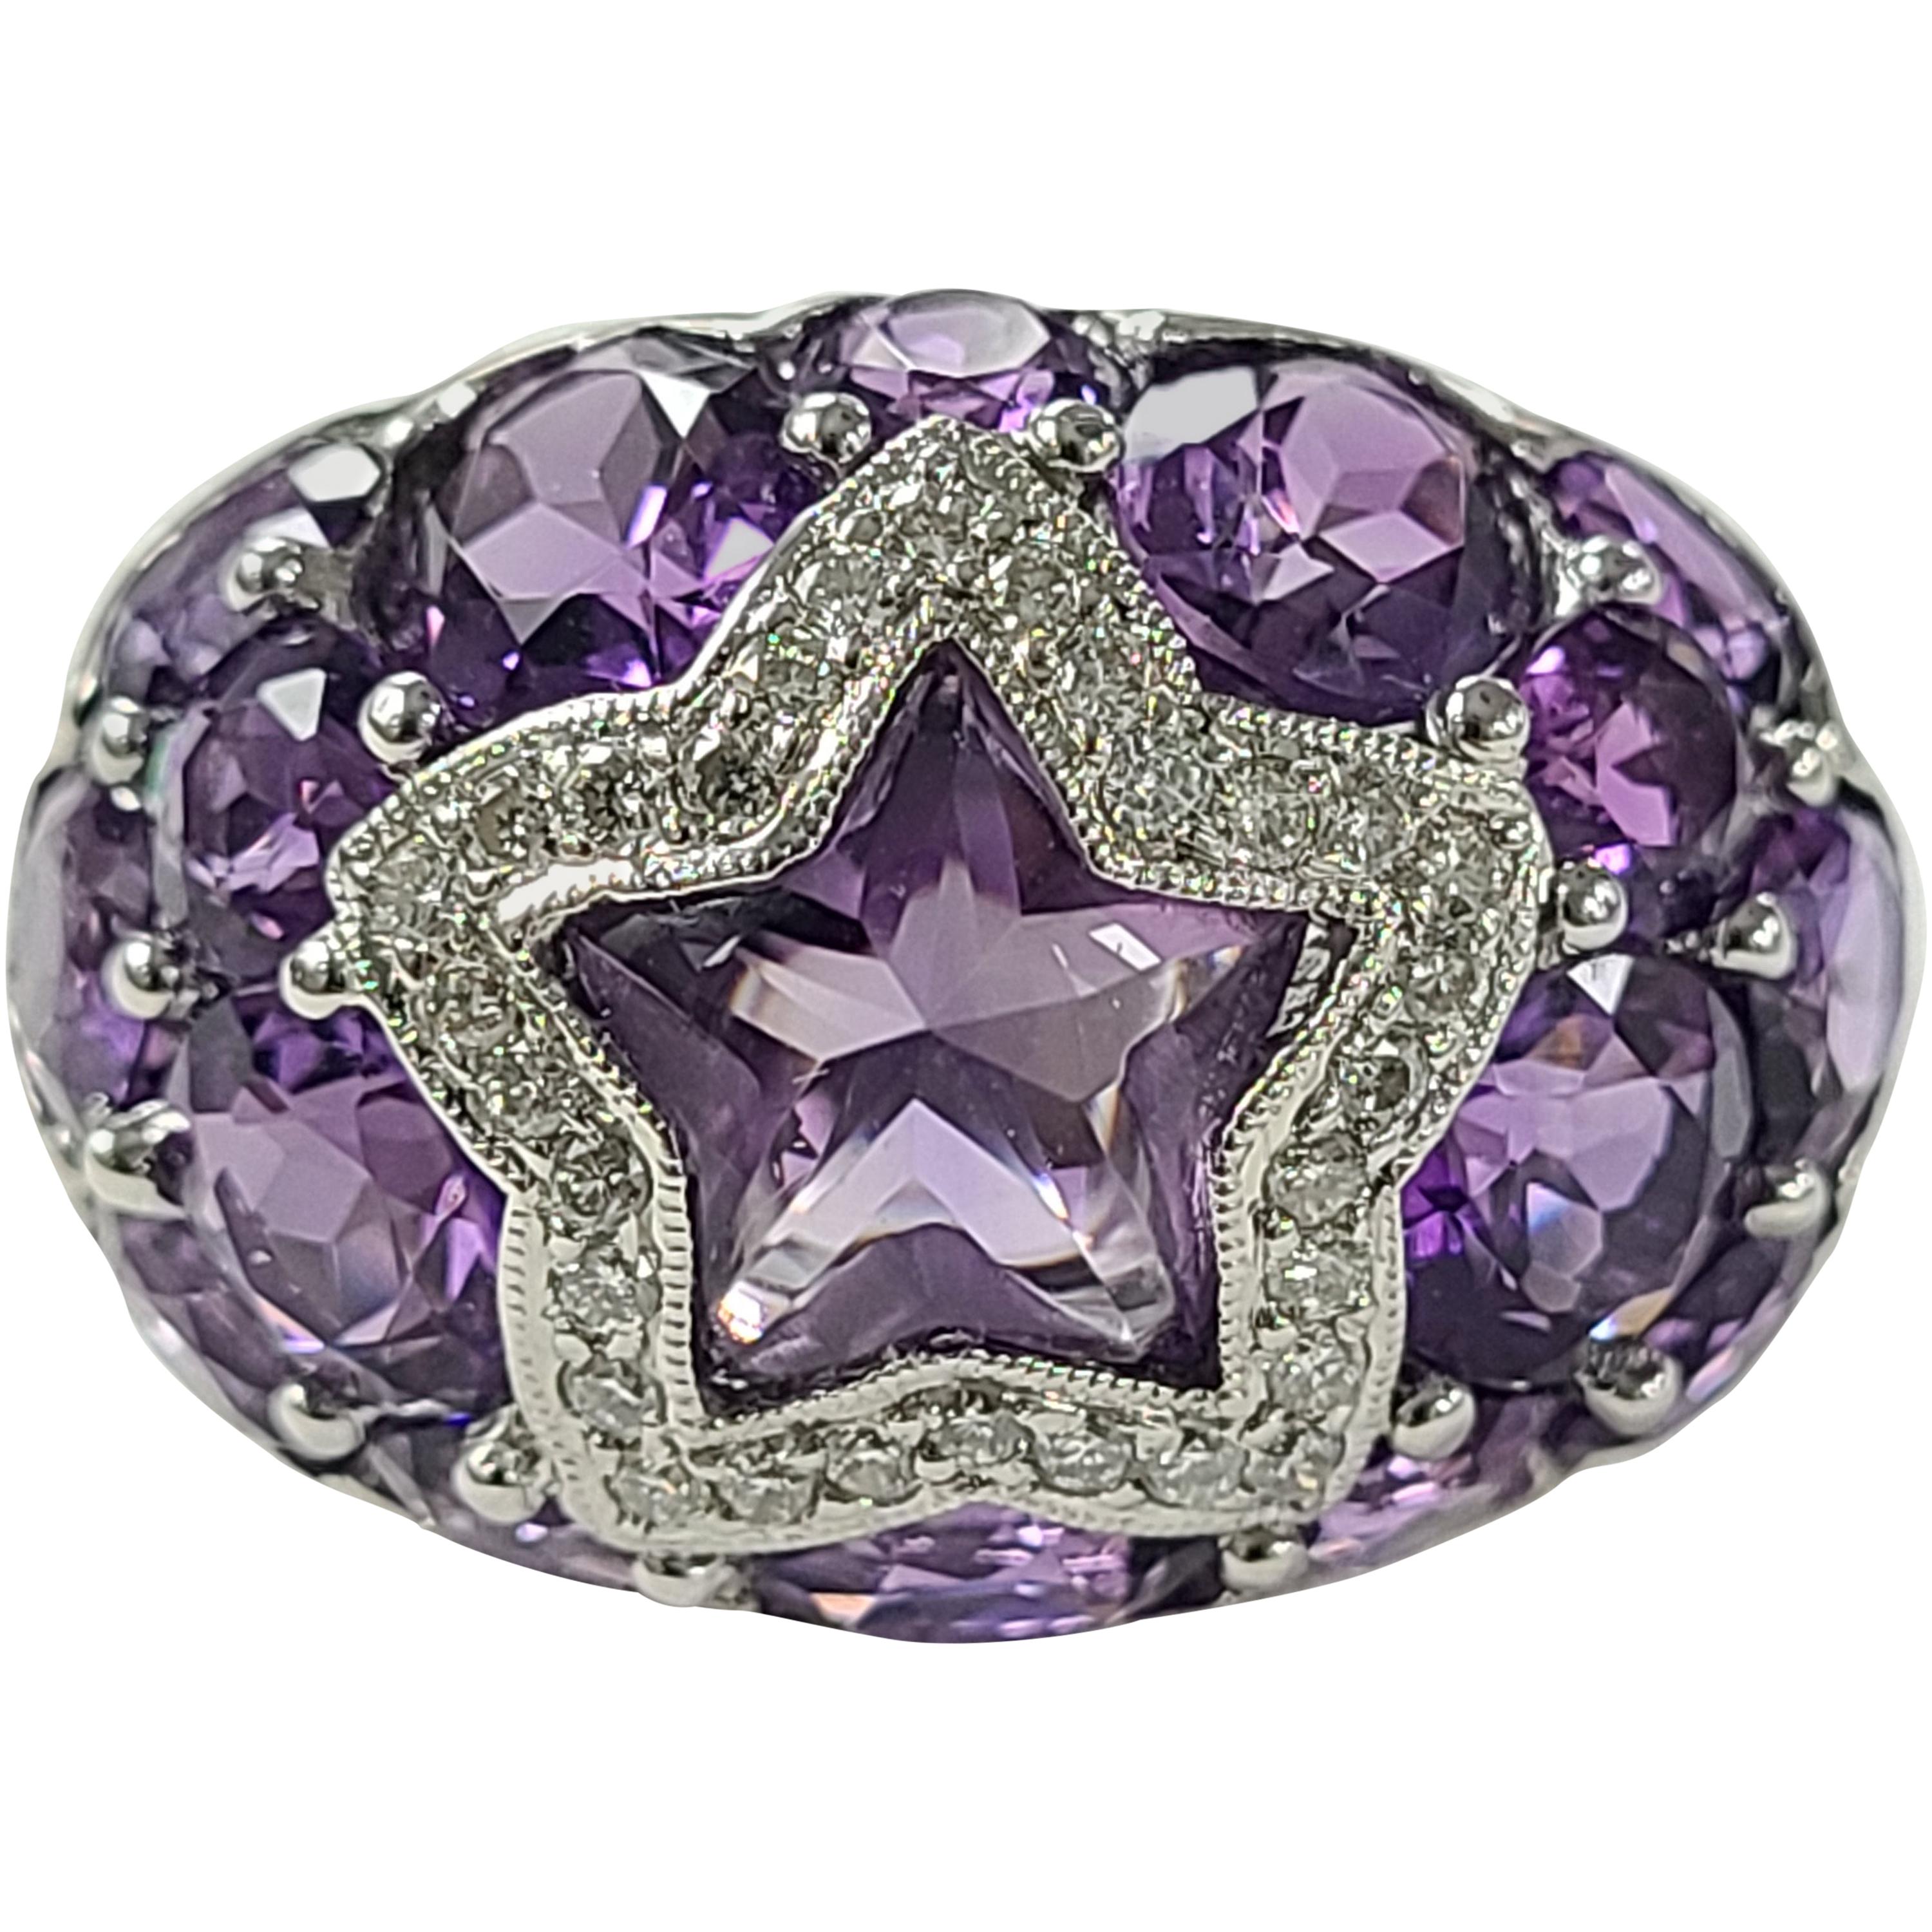 Unique Natural Amethyst ring set with the diamonds ! the centre amethyst is a fancy star shape surrounded by diamonds. Combined weight of amethyst is 9.54 carats and diamond weight is .33 carats . Ring dimensions in cm 1.5 x 2.5 x 2.7 ( L X W X H ).